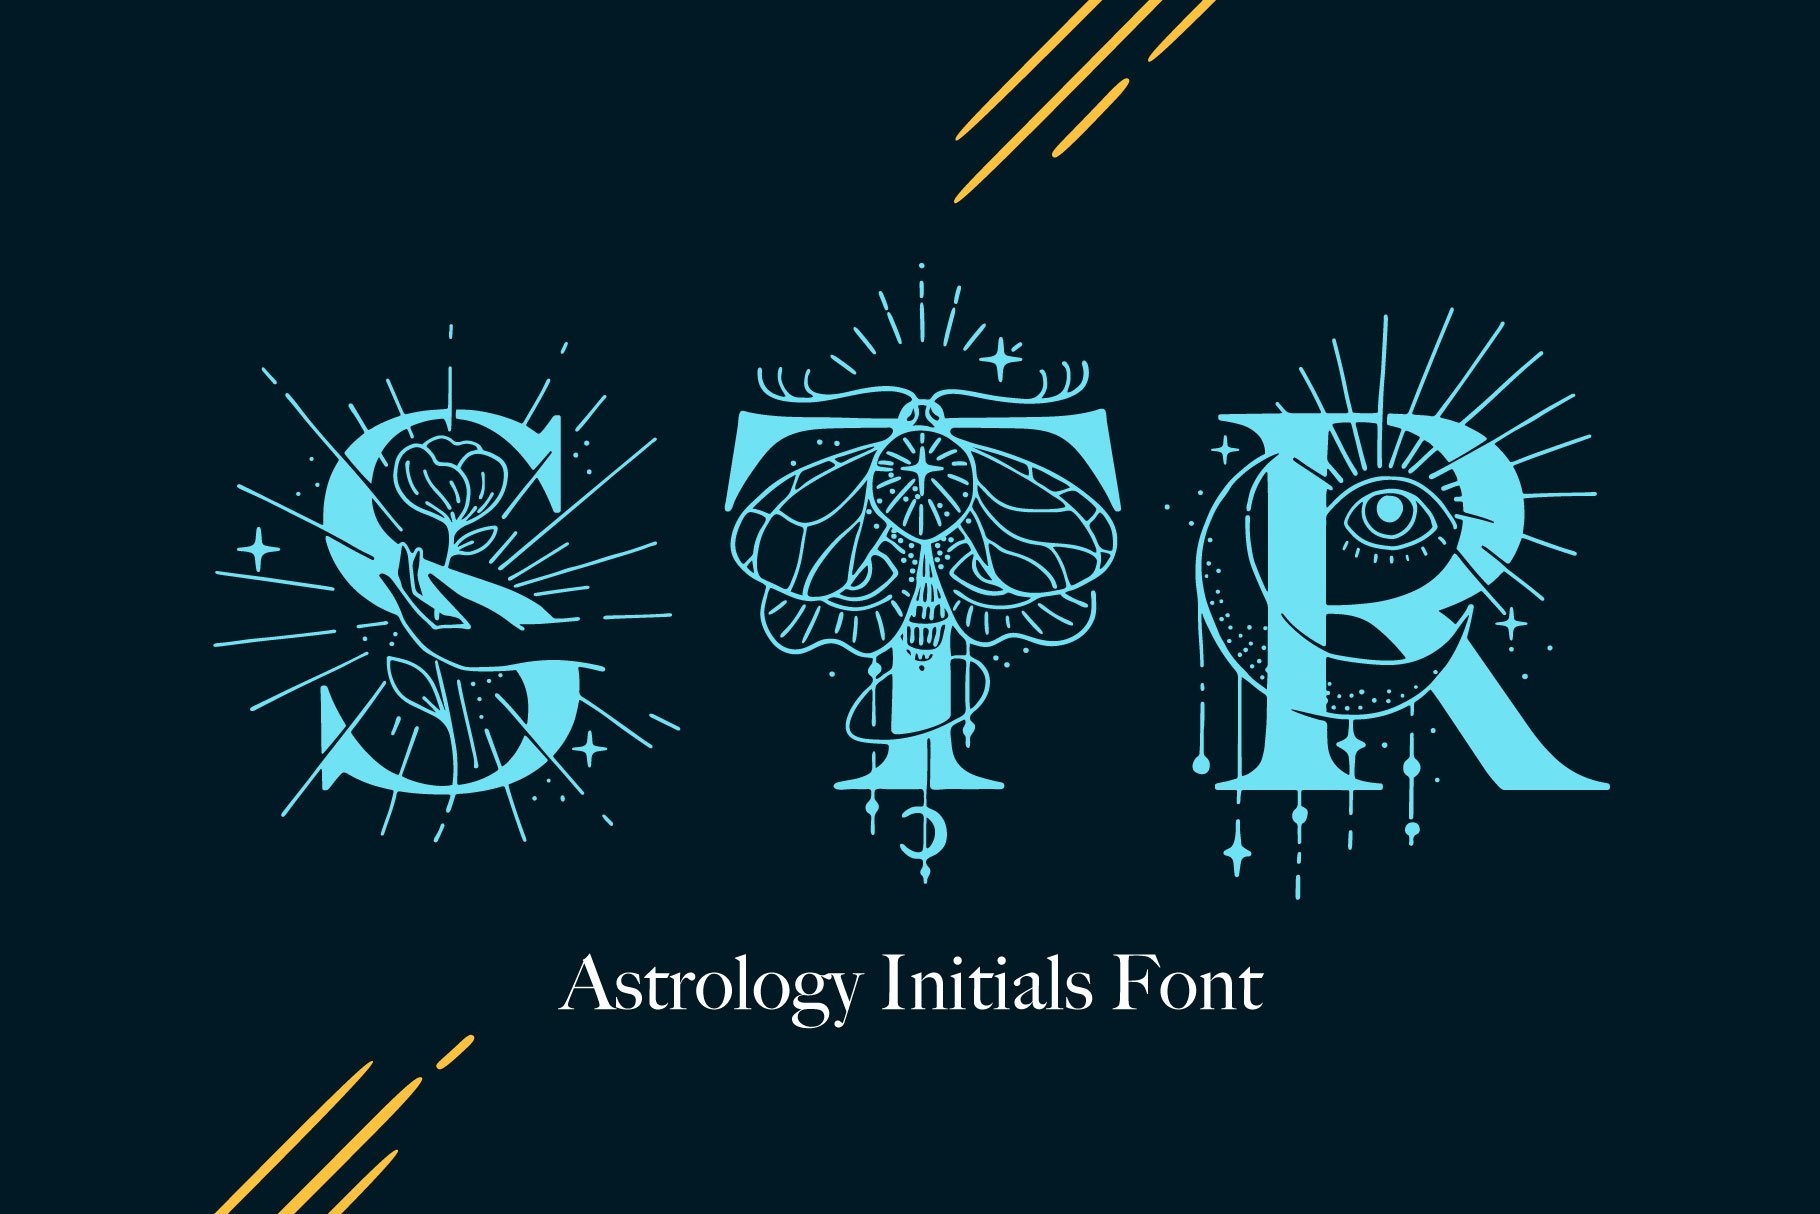 Astrology Initials Font cover image.